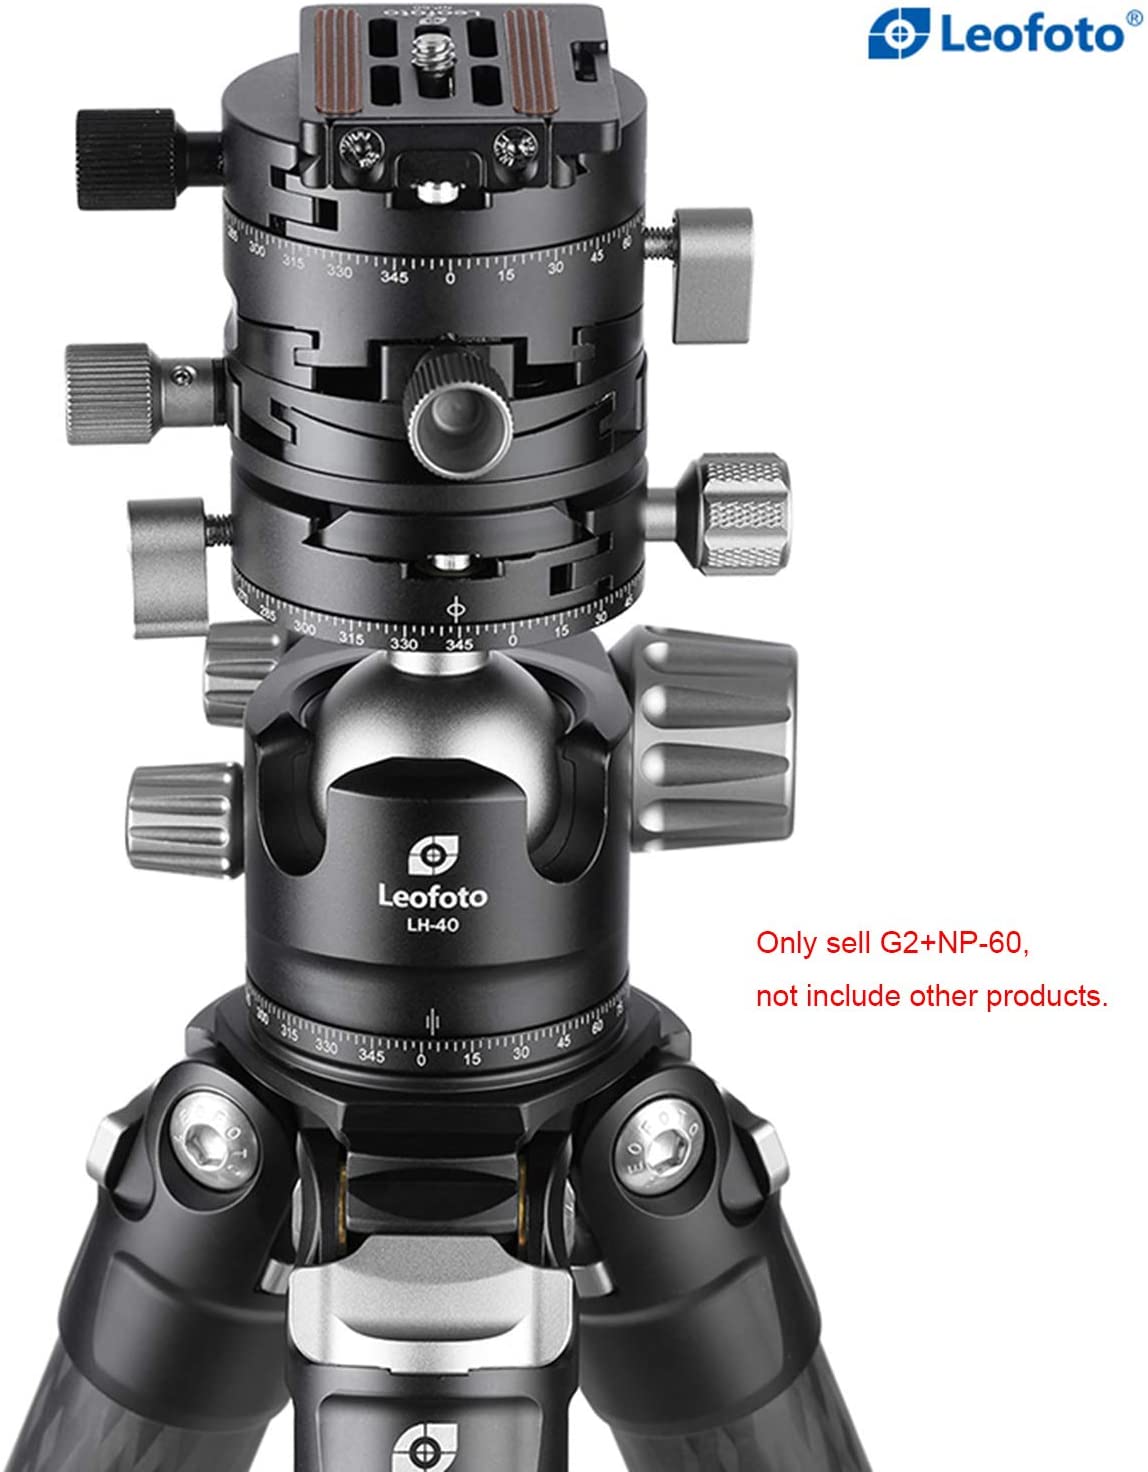 Leofoto G2 3 in 1 Panorama Geared Ballhead Dual-axis Adjustment, 3 Directions Controlled Separately With NP-60 Q-R Plate